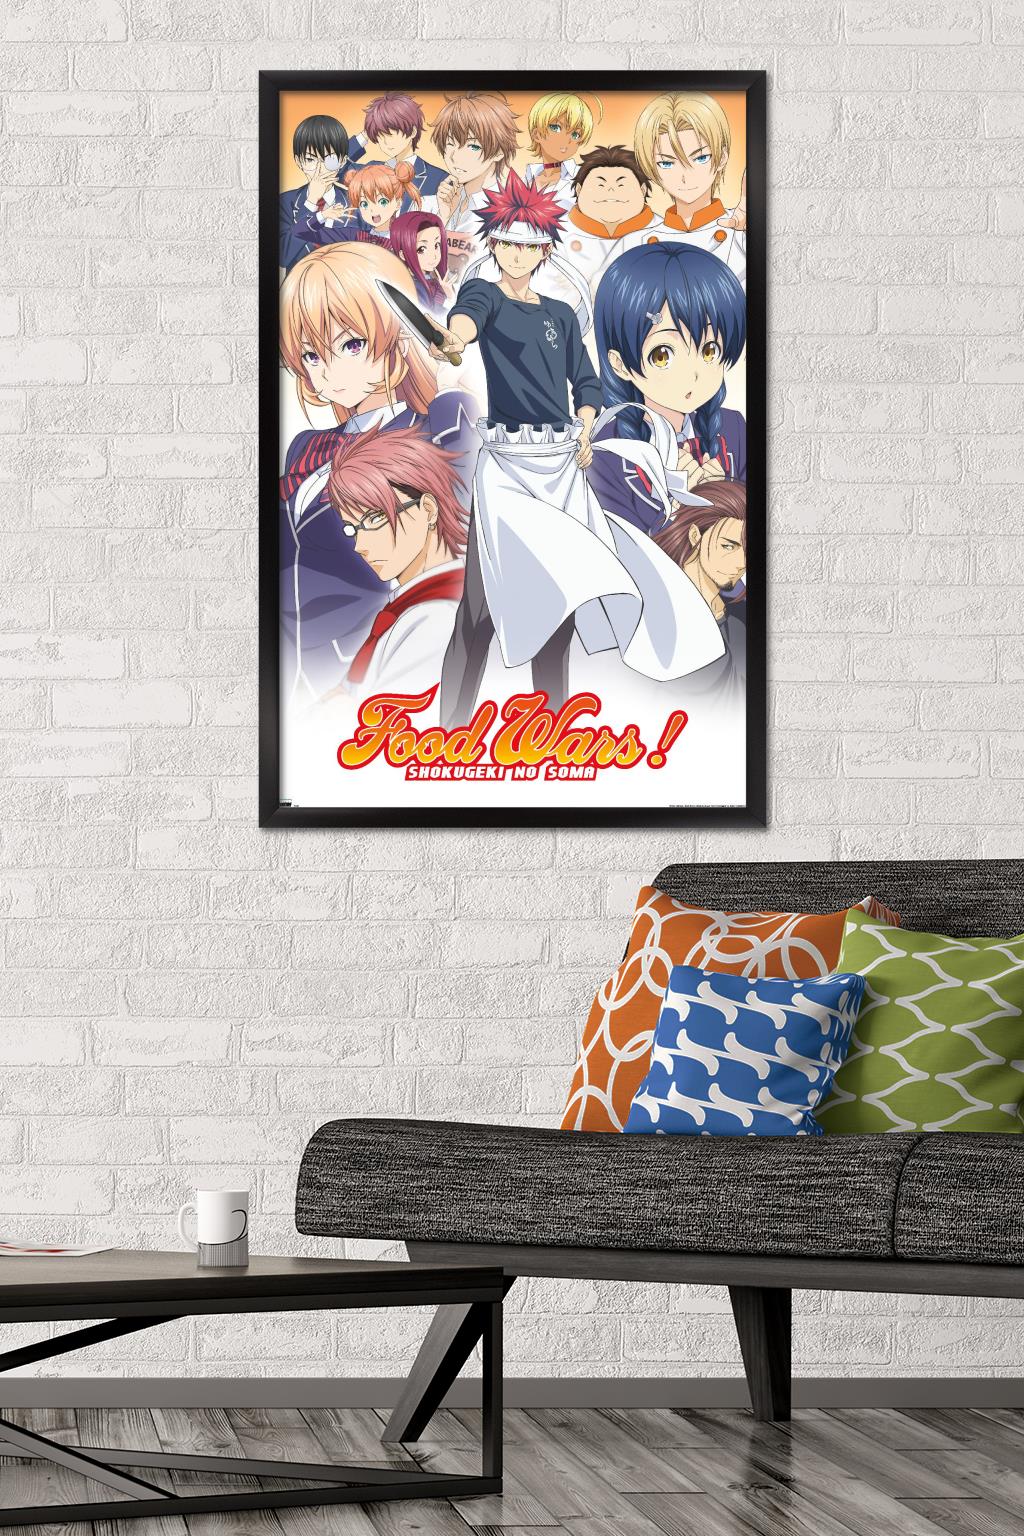 Food Wars! - Group 24.25 in x 35.75 in Framed Poster, by Trends International - image 2 of 6